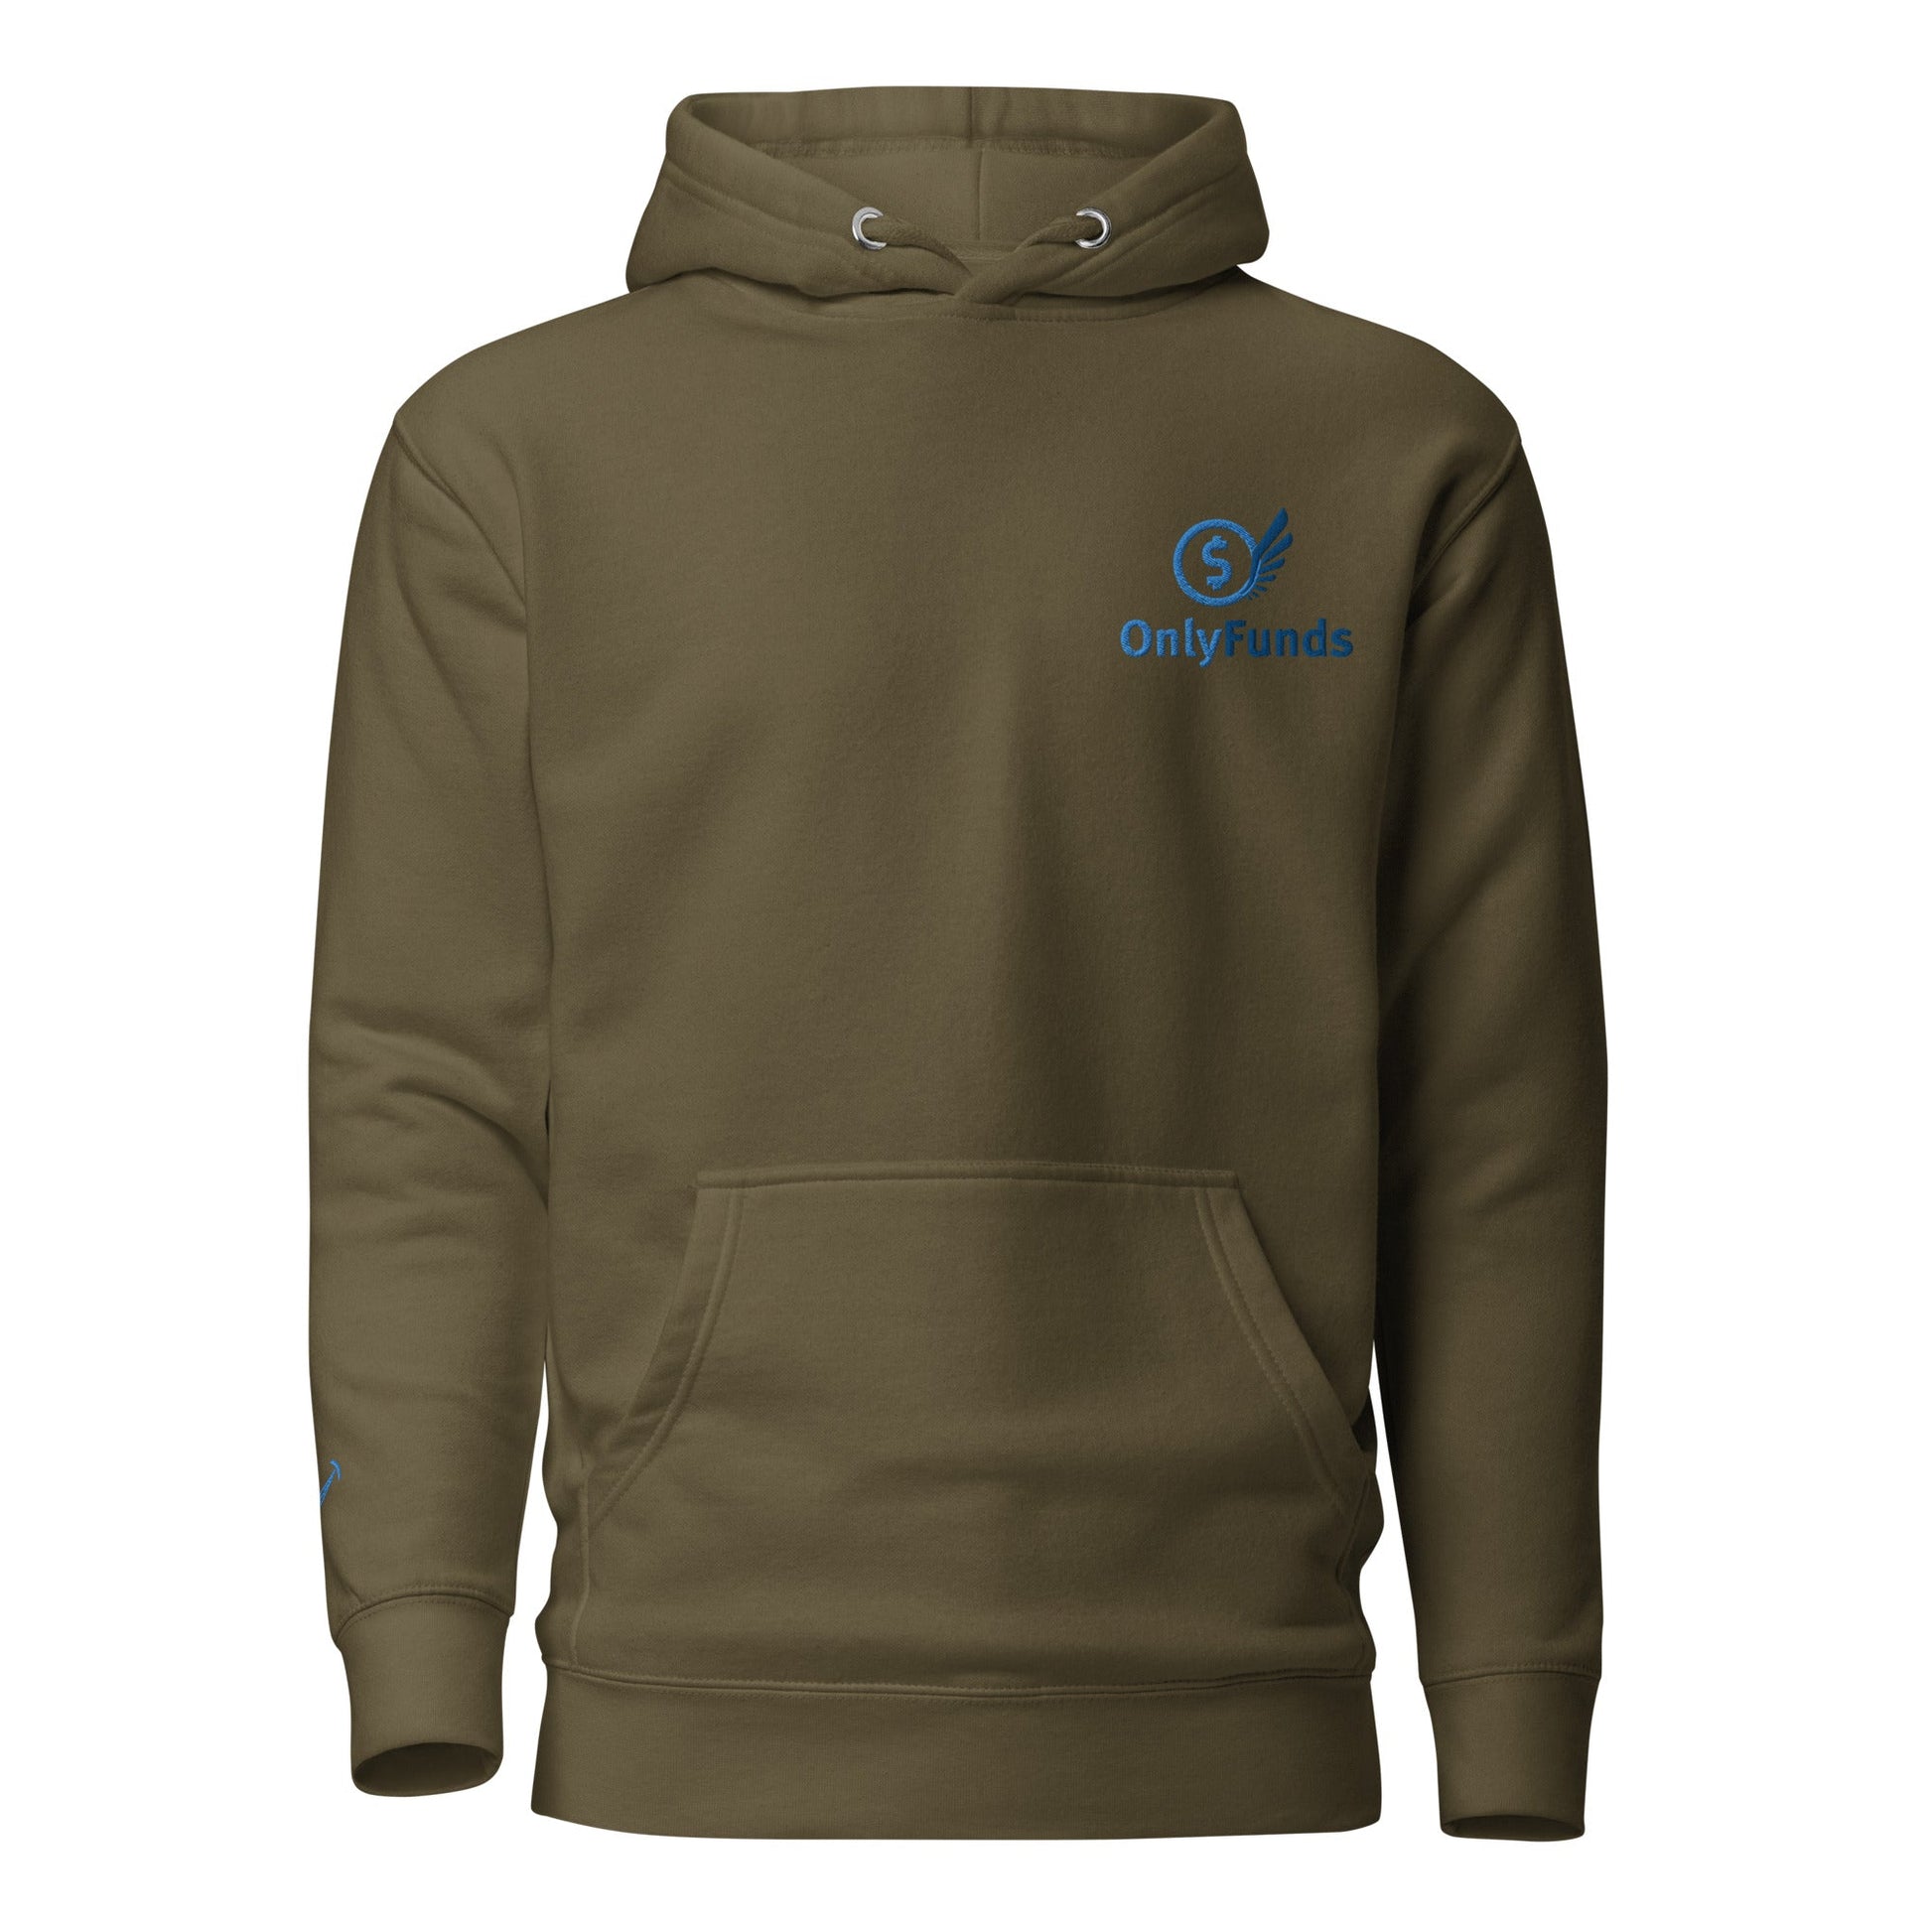 OnlyFunds Embroidered Unisex Hoodie - chucklecouture co.